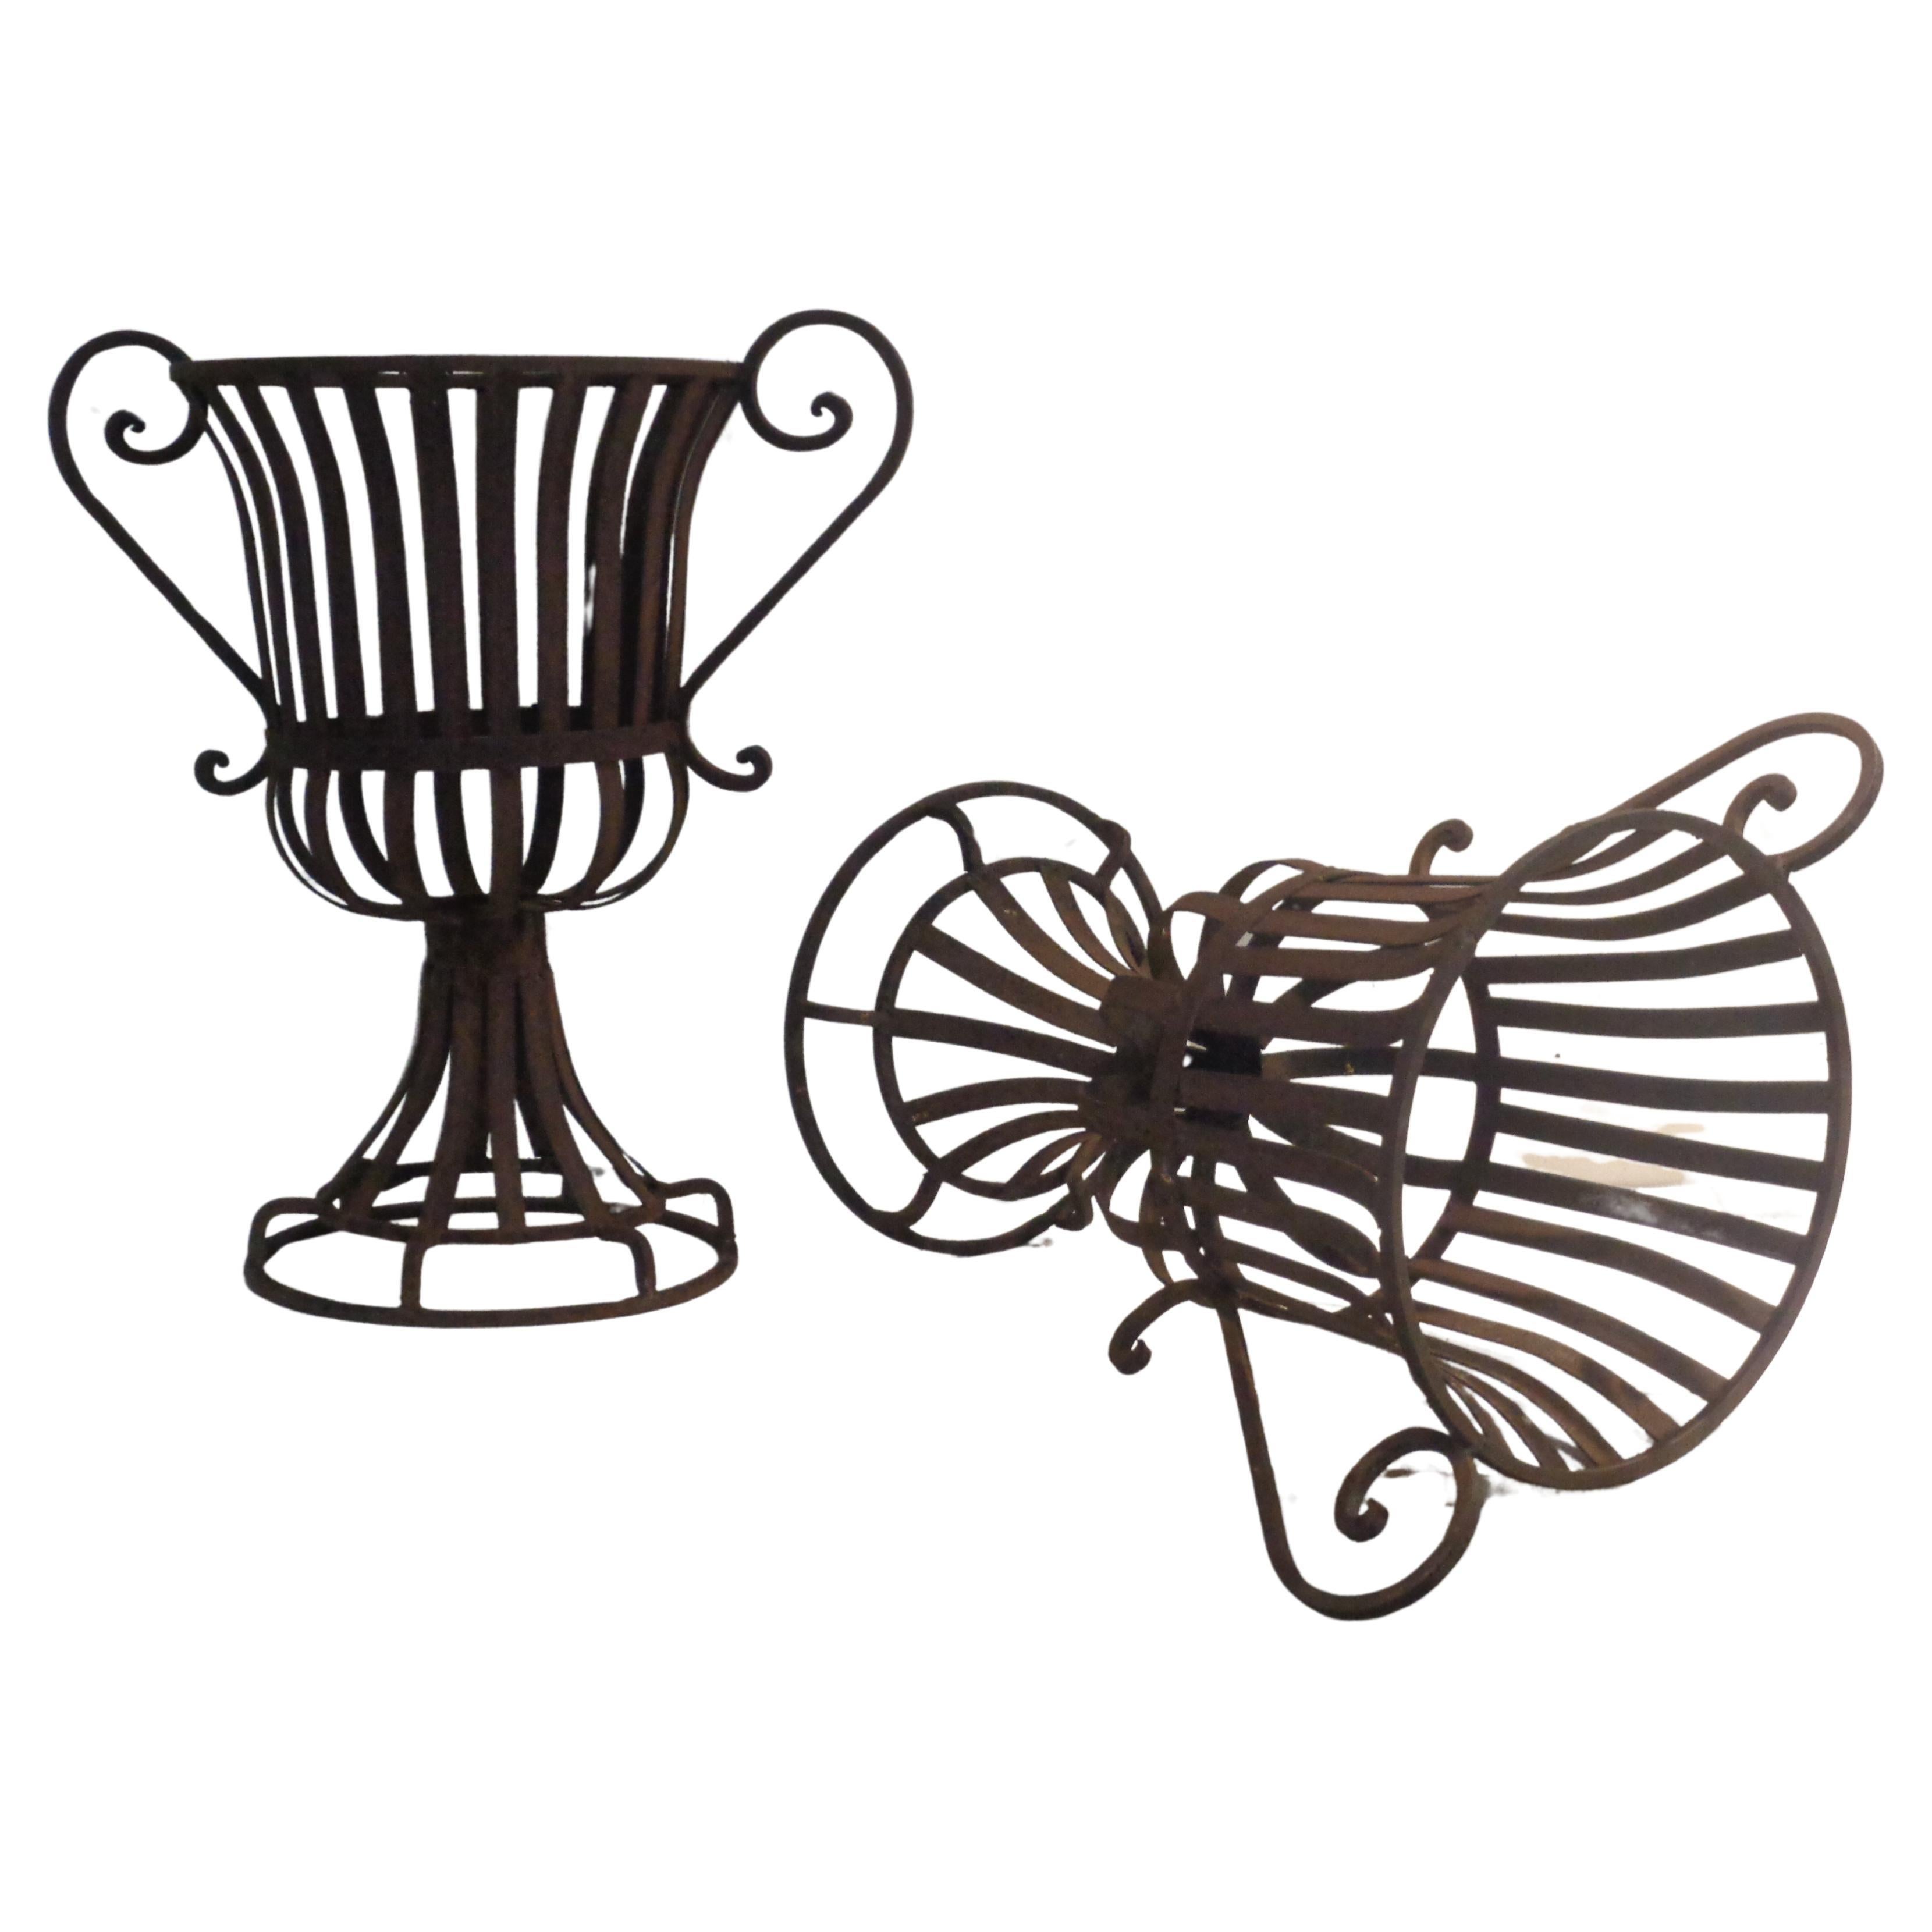 Pair Neoclassical Style Strap Iron Garden Urns, Circa 1970-1980 For Sale 5